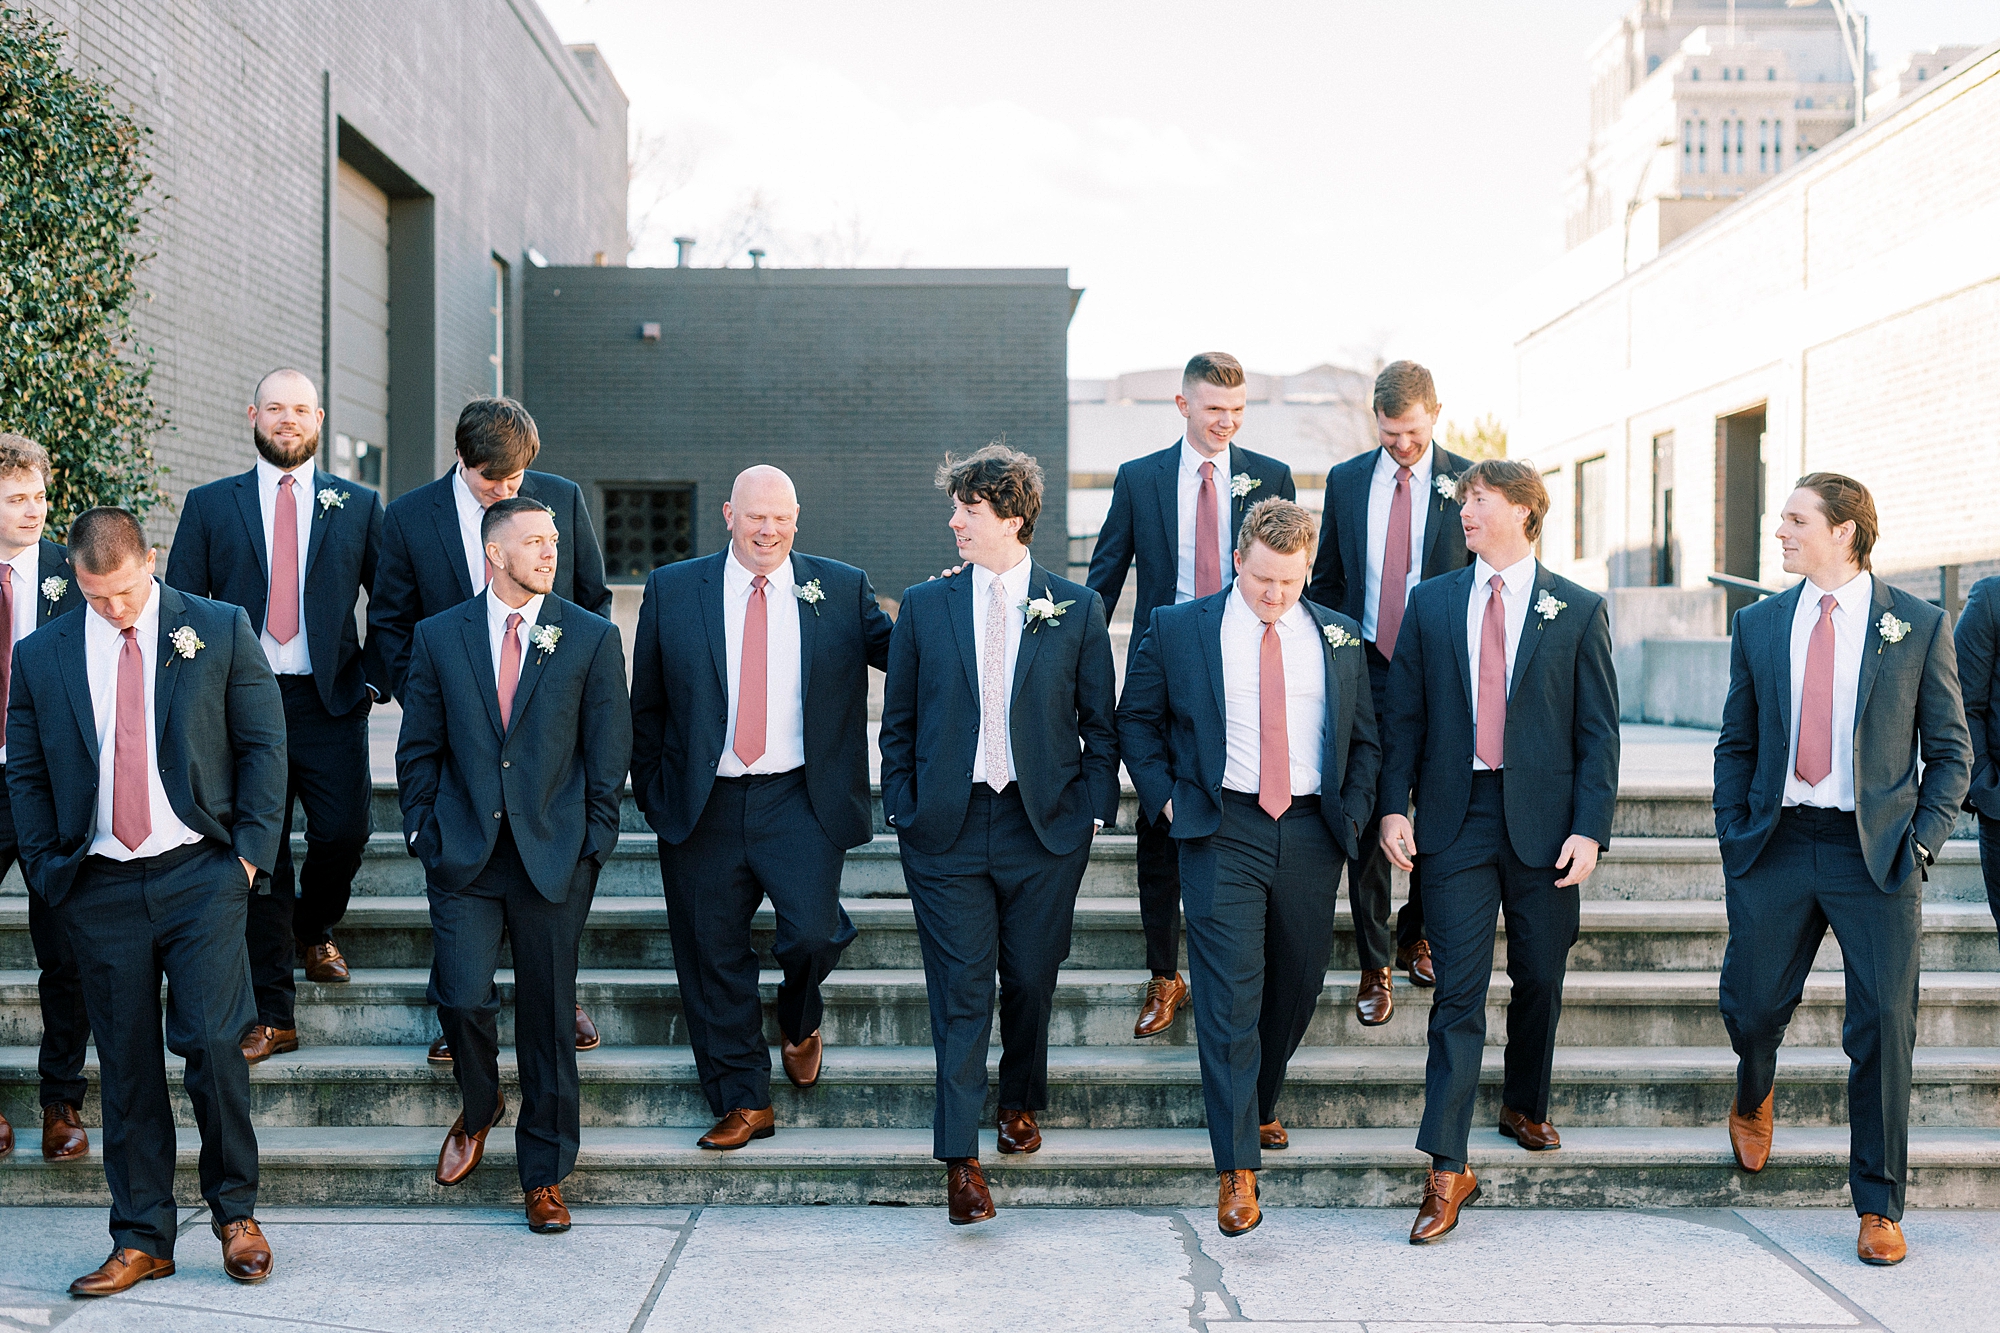 groom walks down steps with groomsmen in navy suits at the Cadillac Service Garage